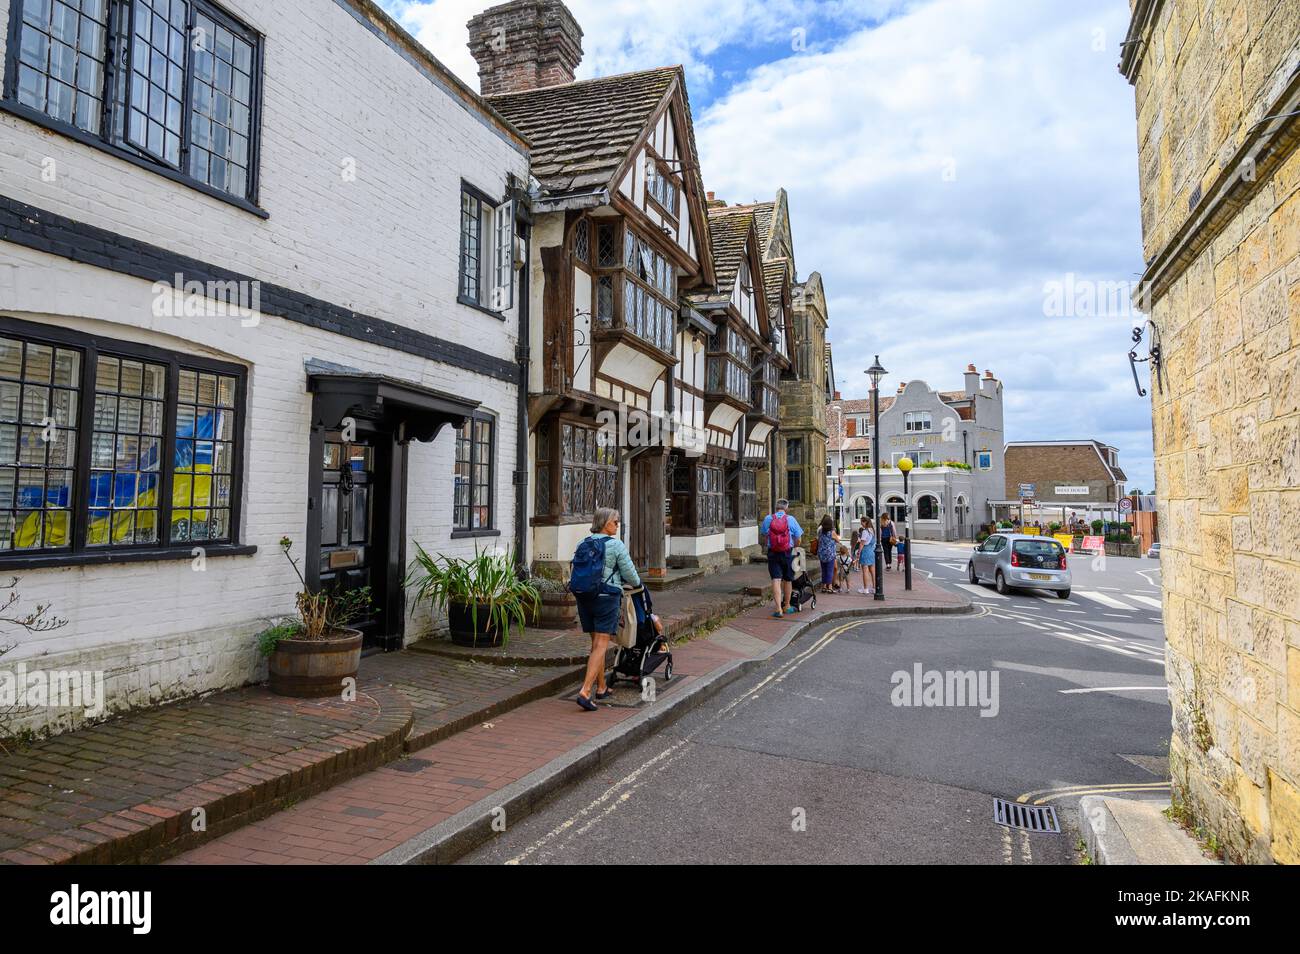 One end of the long row of old, historic houses along High Street in East Grinstead, East Sussex, England. Stock Photo